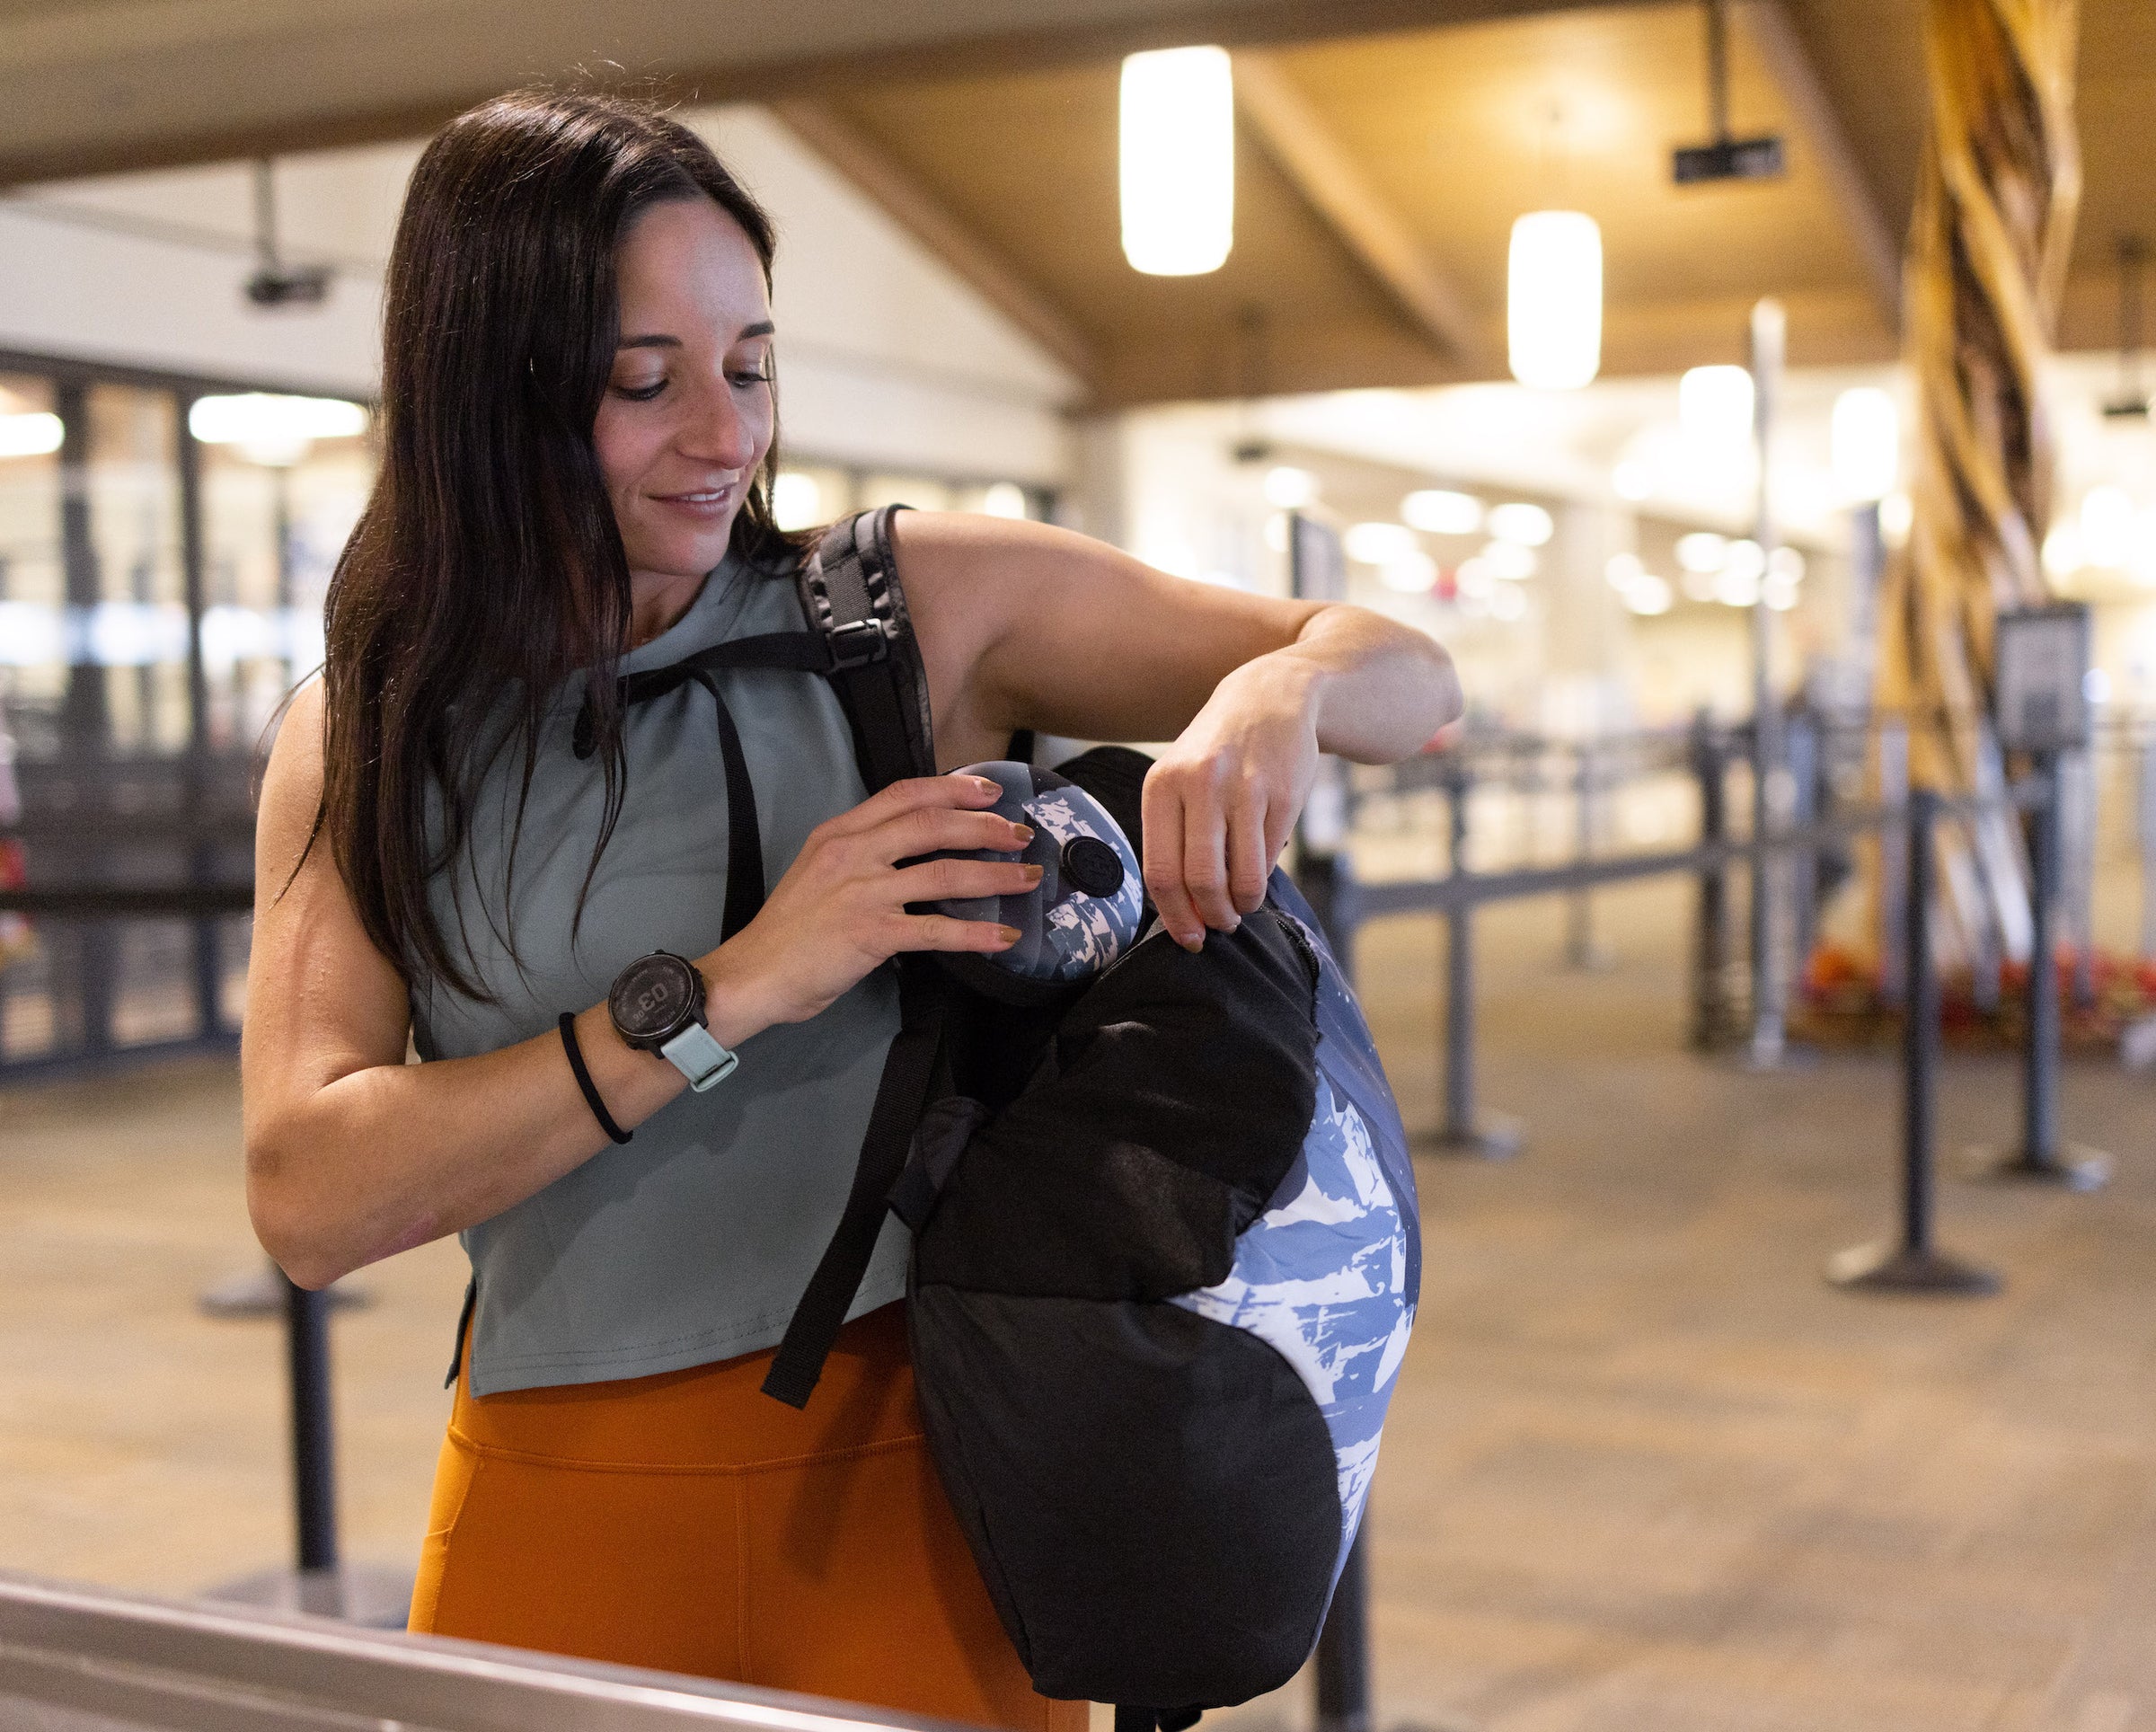 A woman packs up her HYDAWAY collapsible water bottle into a travel case before boarding her flight at TSA security checkpoint